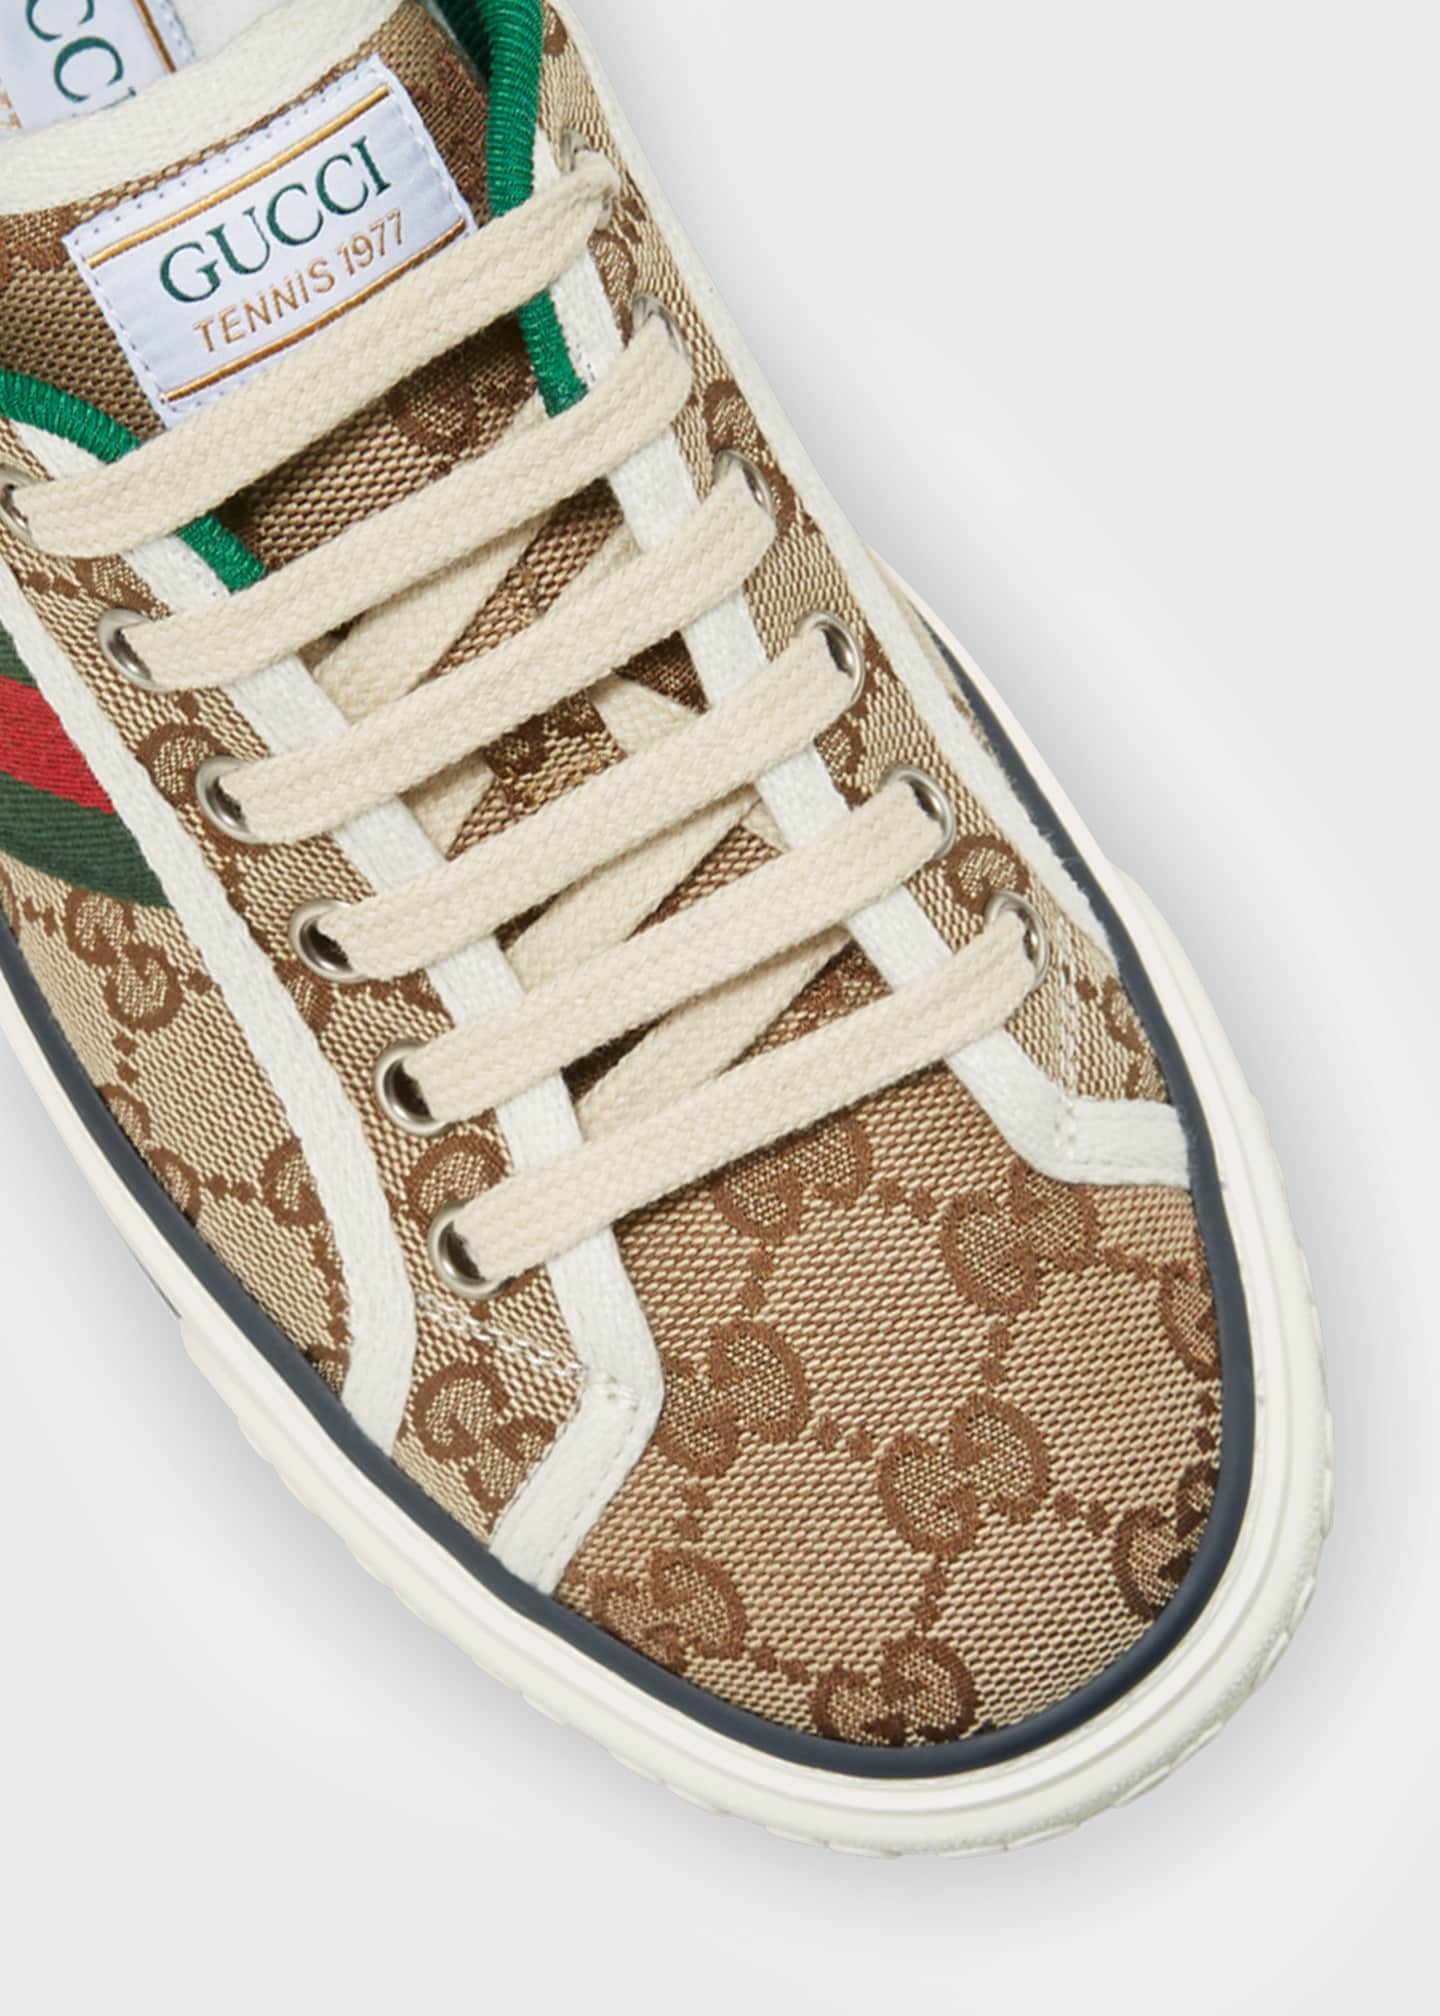 Gucci Gucci Tennis 1977 Sneakers Image 4 of 4